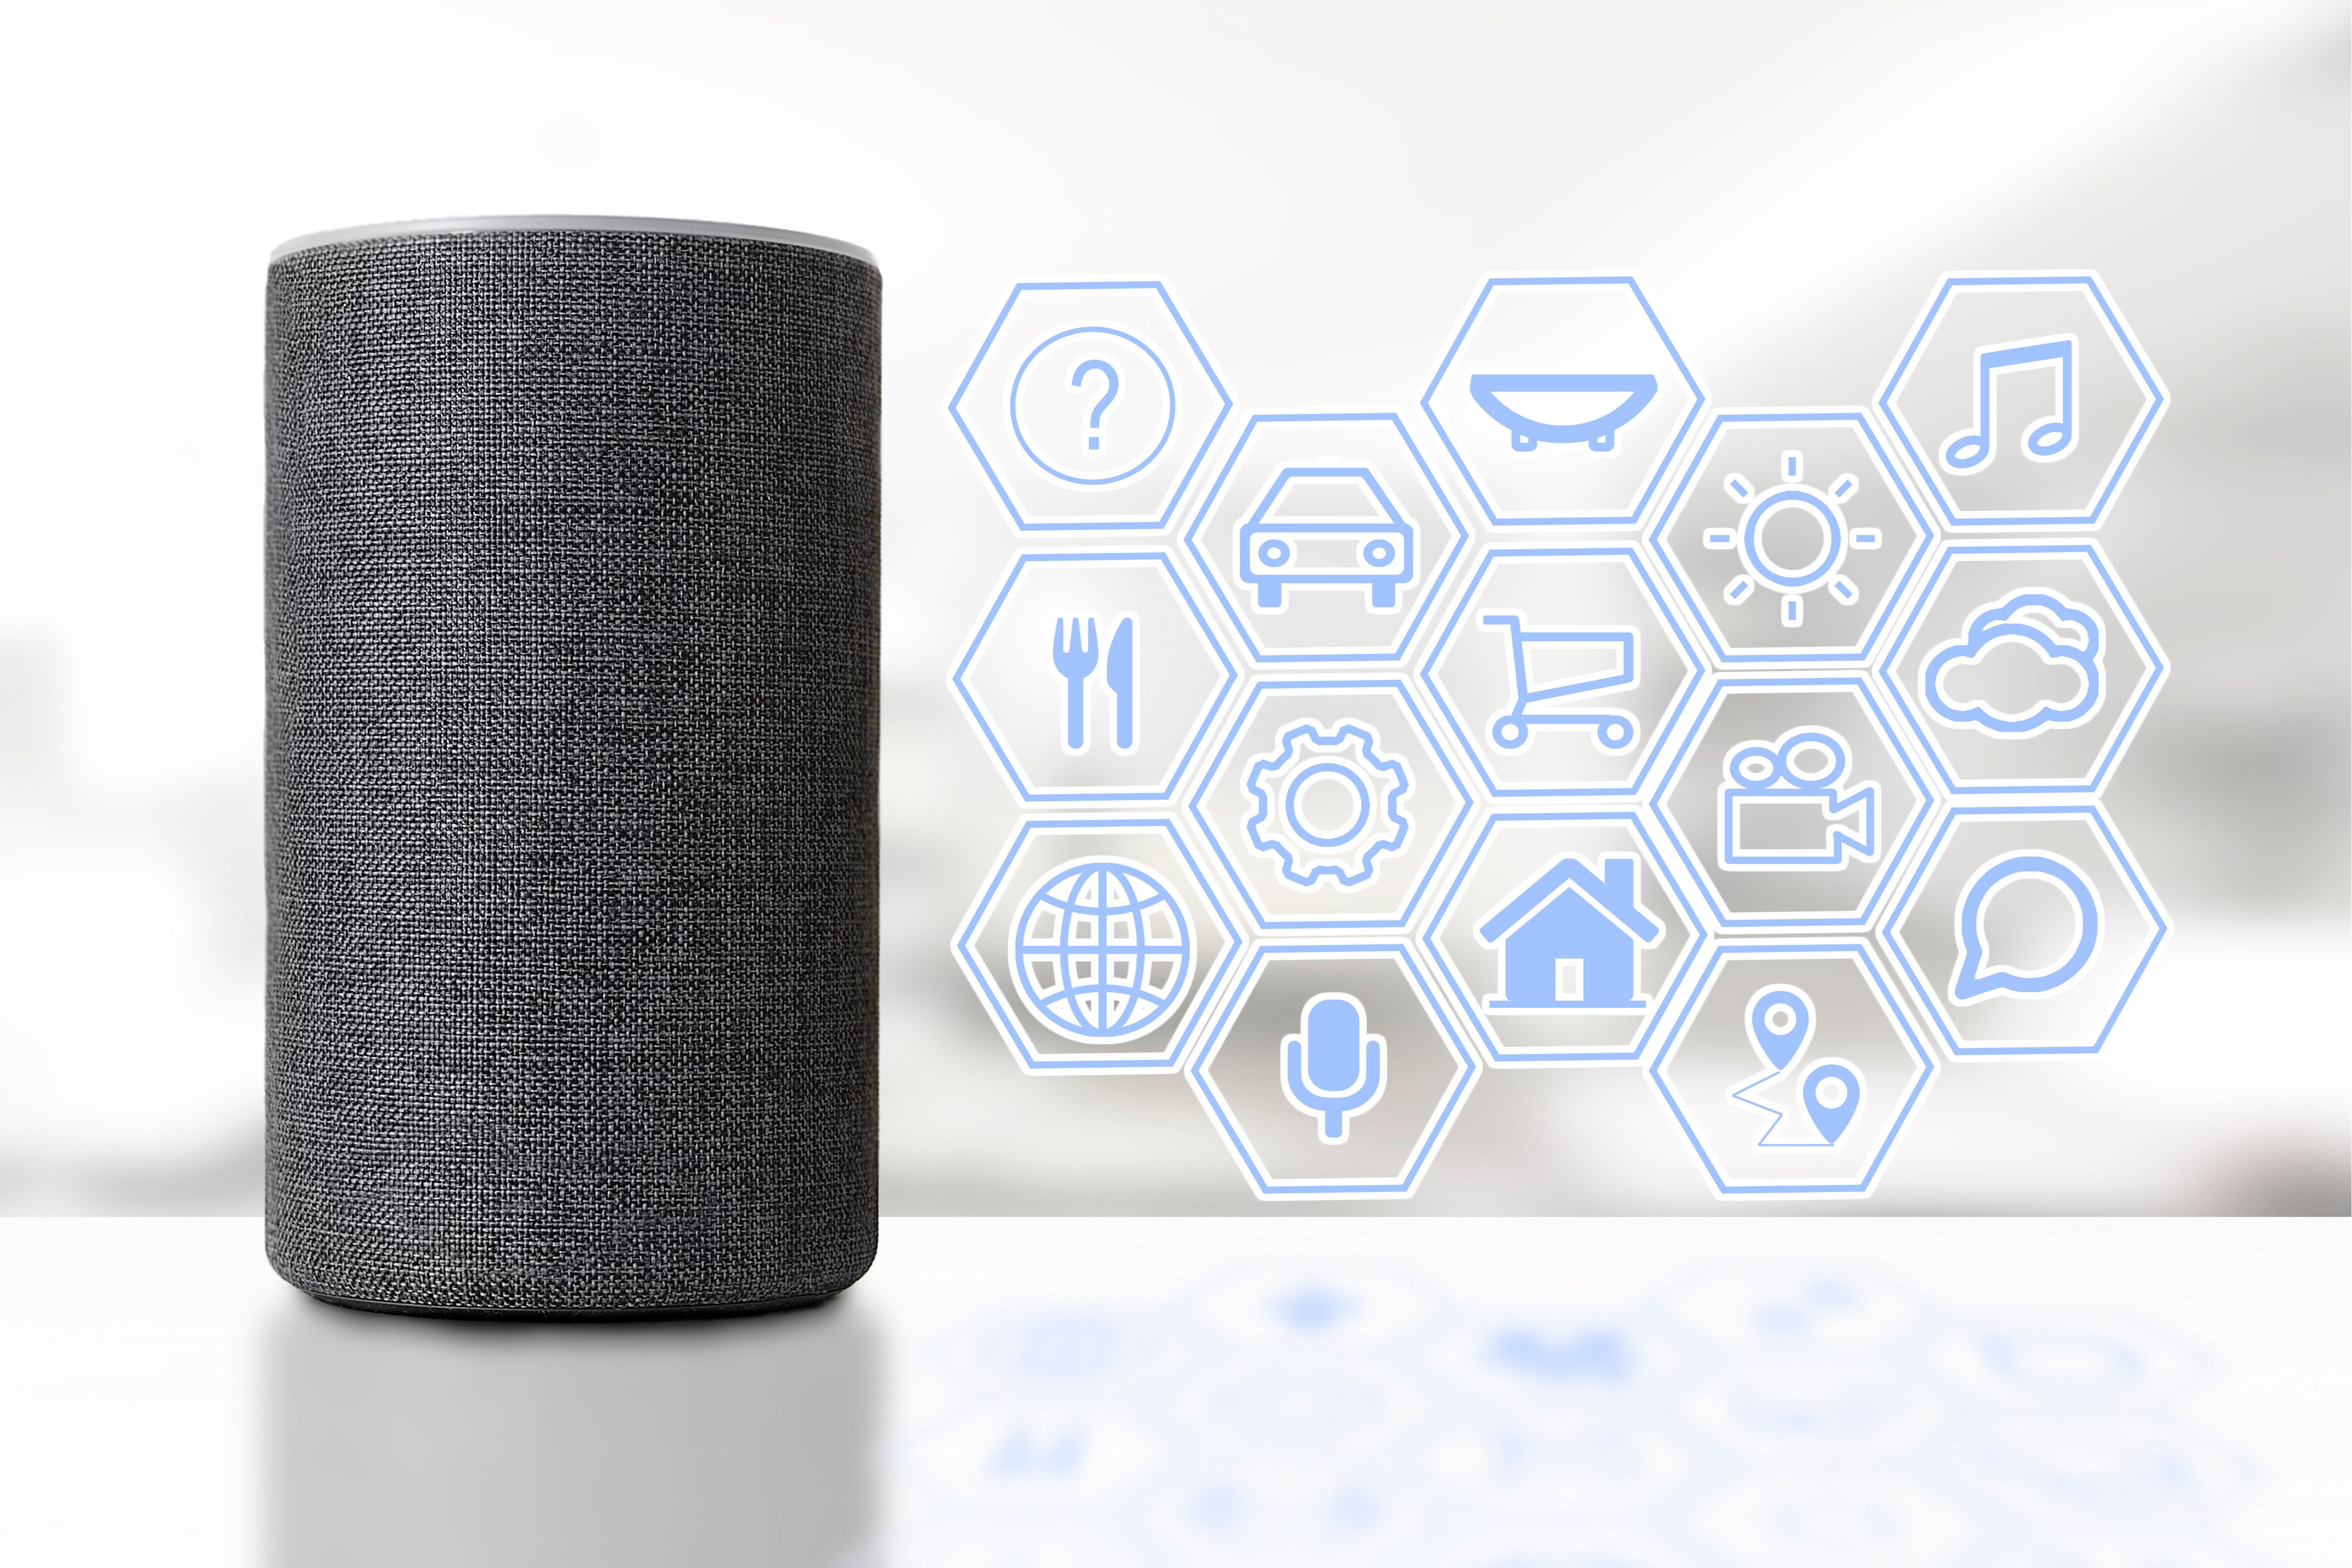 Brands can create an Alexa skill to drive traffic to their Amazon listings.